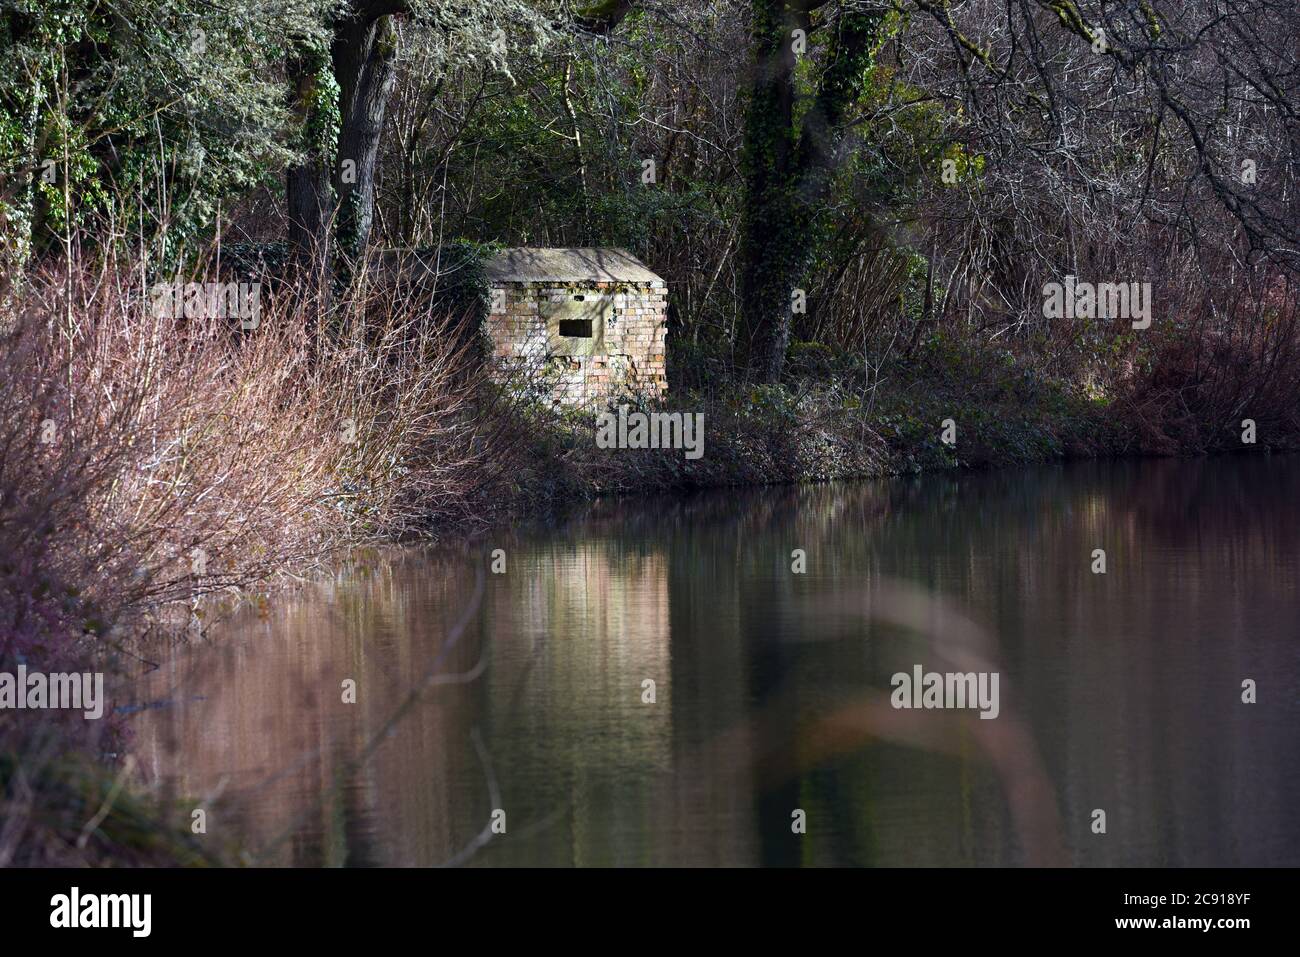 An old military structure is reflected in the still waters of the beautiful Basingstoke Canal in Hampshire, in this photo taken on a mild winter day Stock Photo